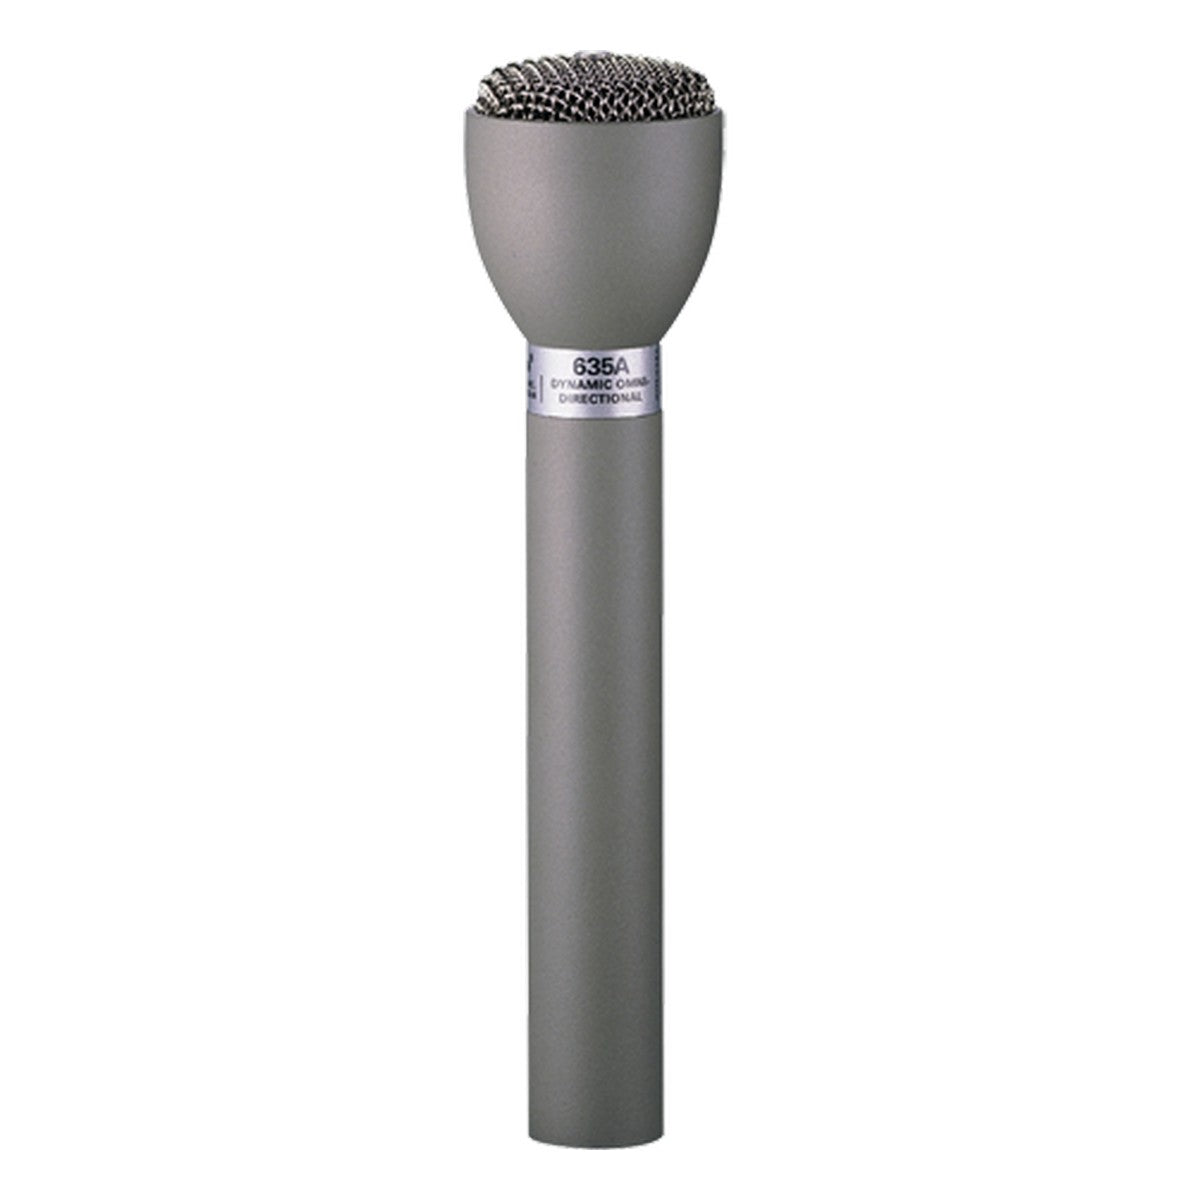 Electro-Voice 635A Classic Handheld Interview Microphone